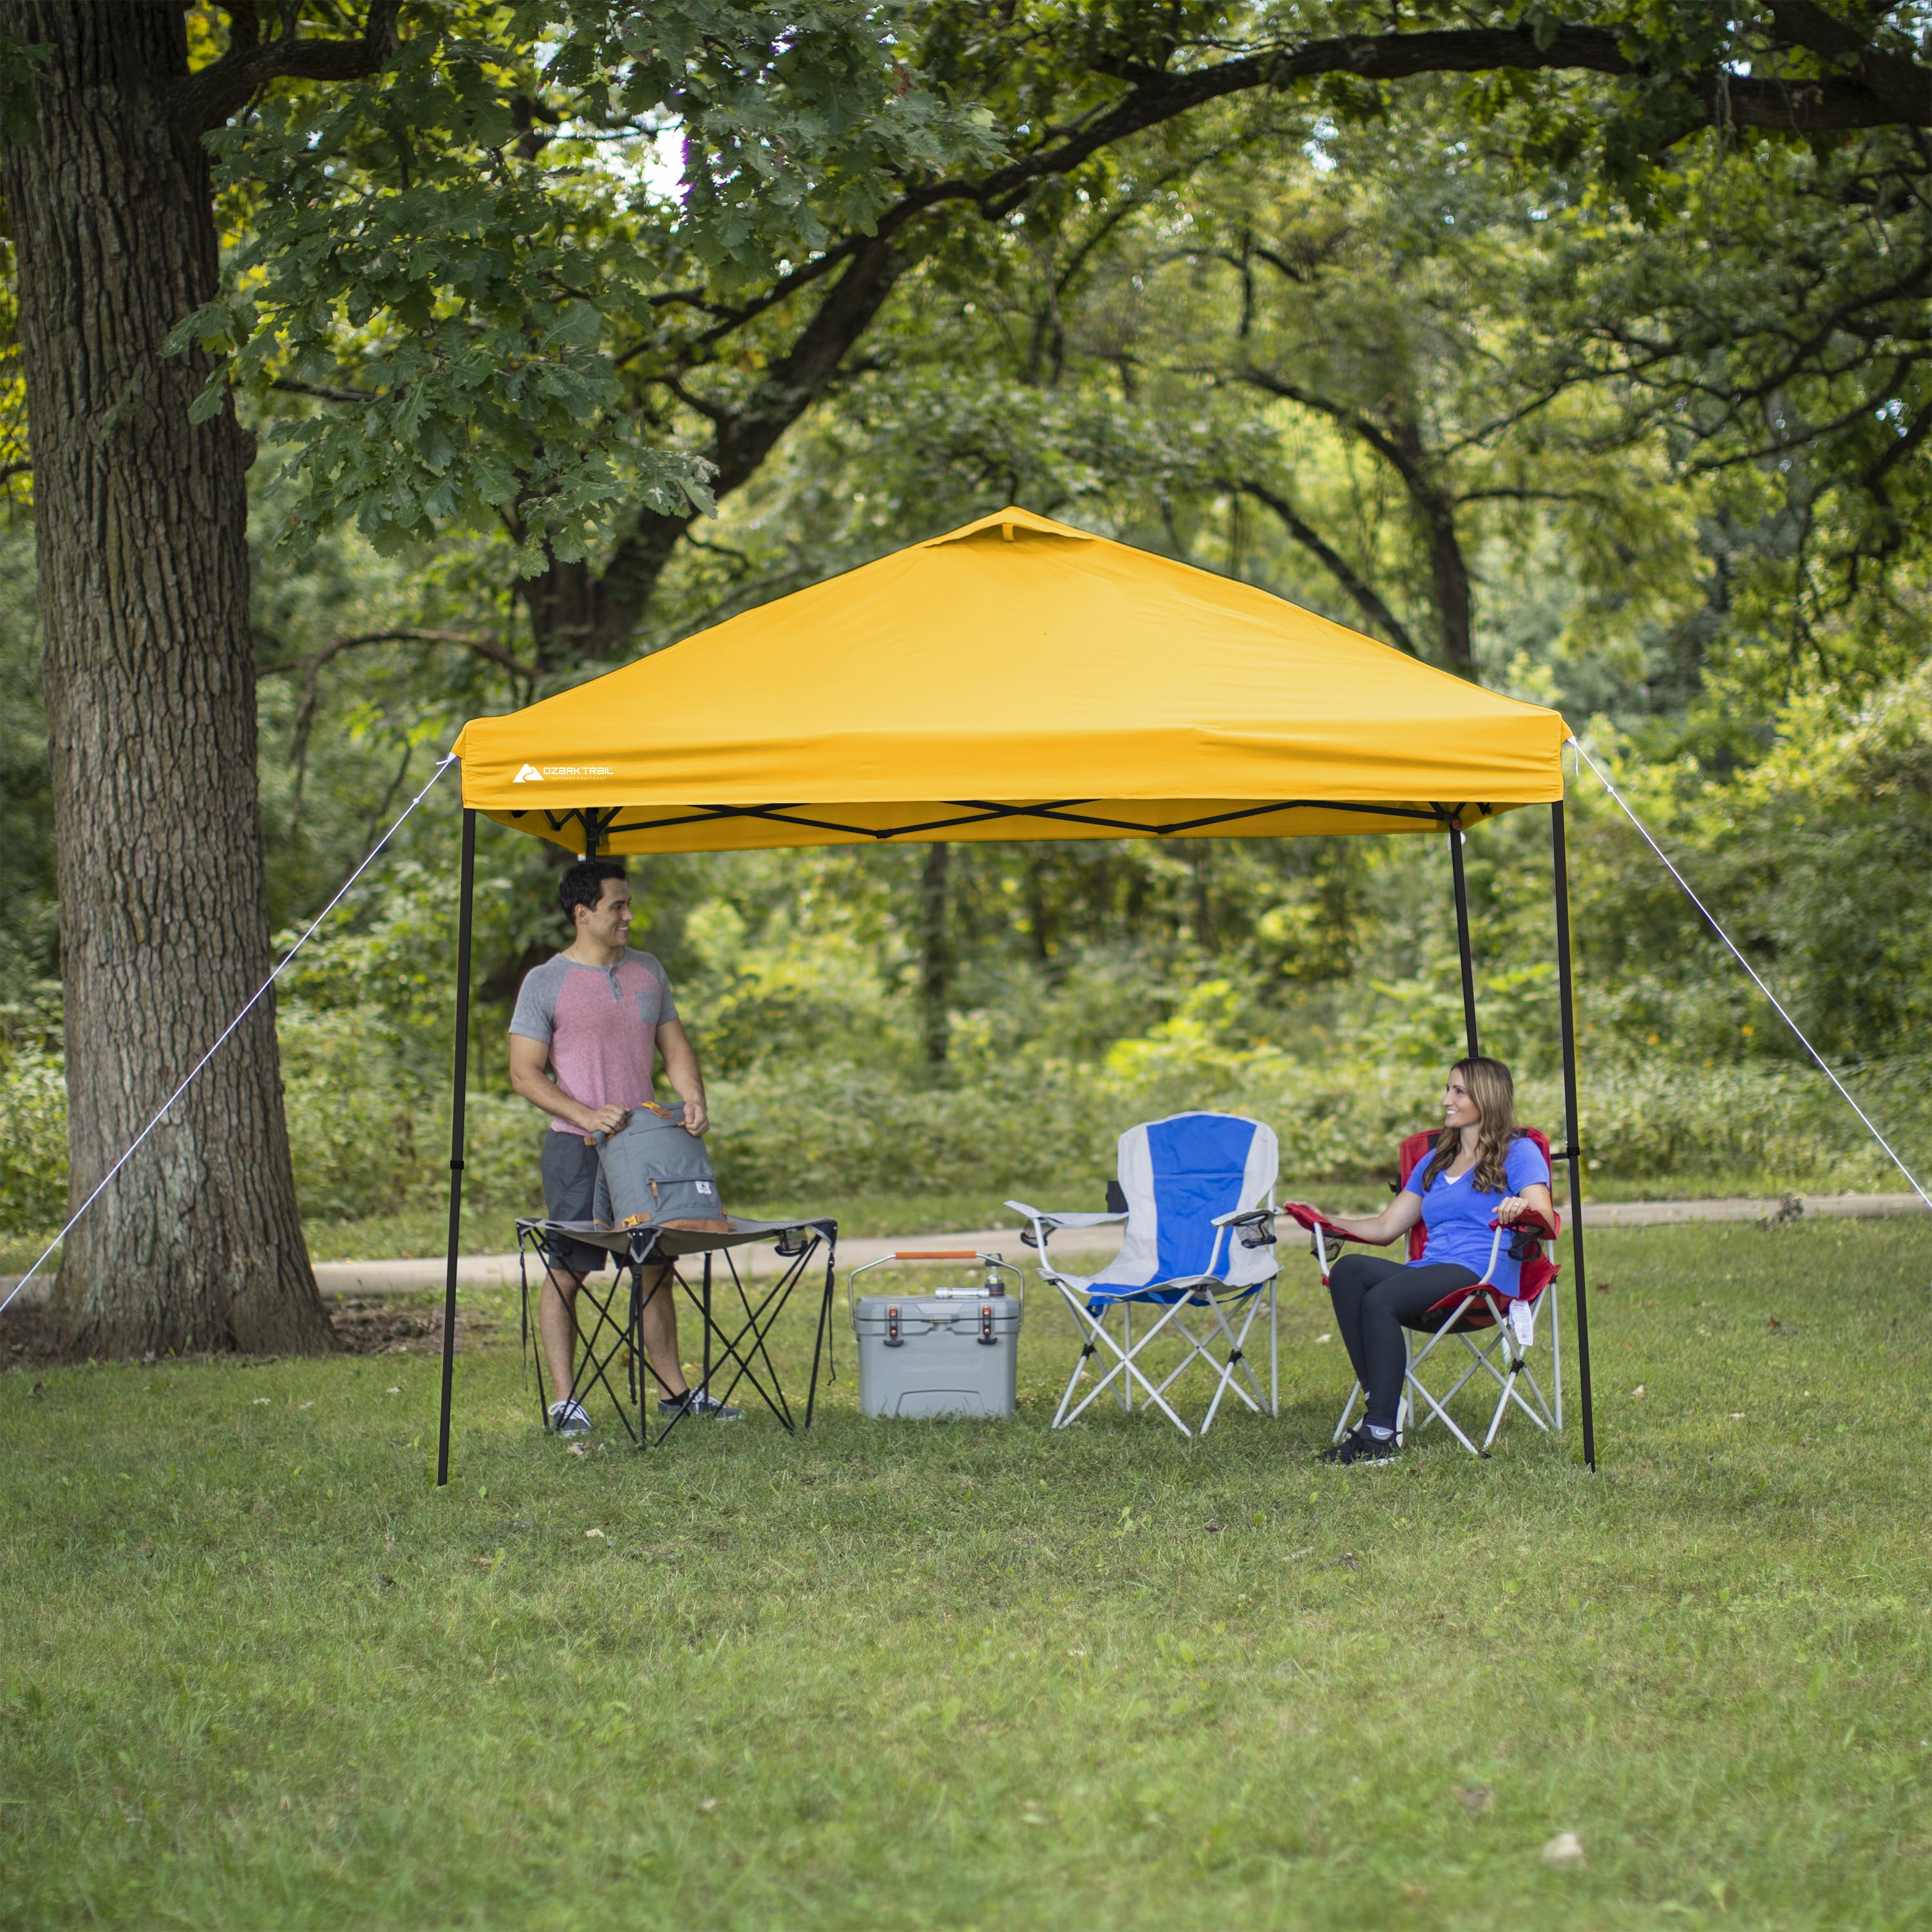 Ozark Trail 10' x 10' Yellow Instant Outdoor Canopy with UV Protection Material - image 4 of 5